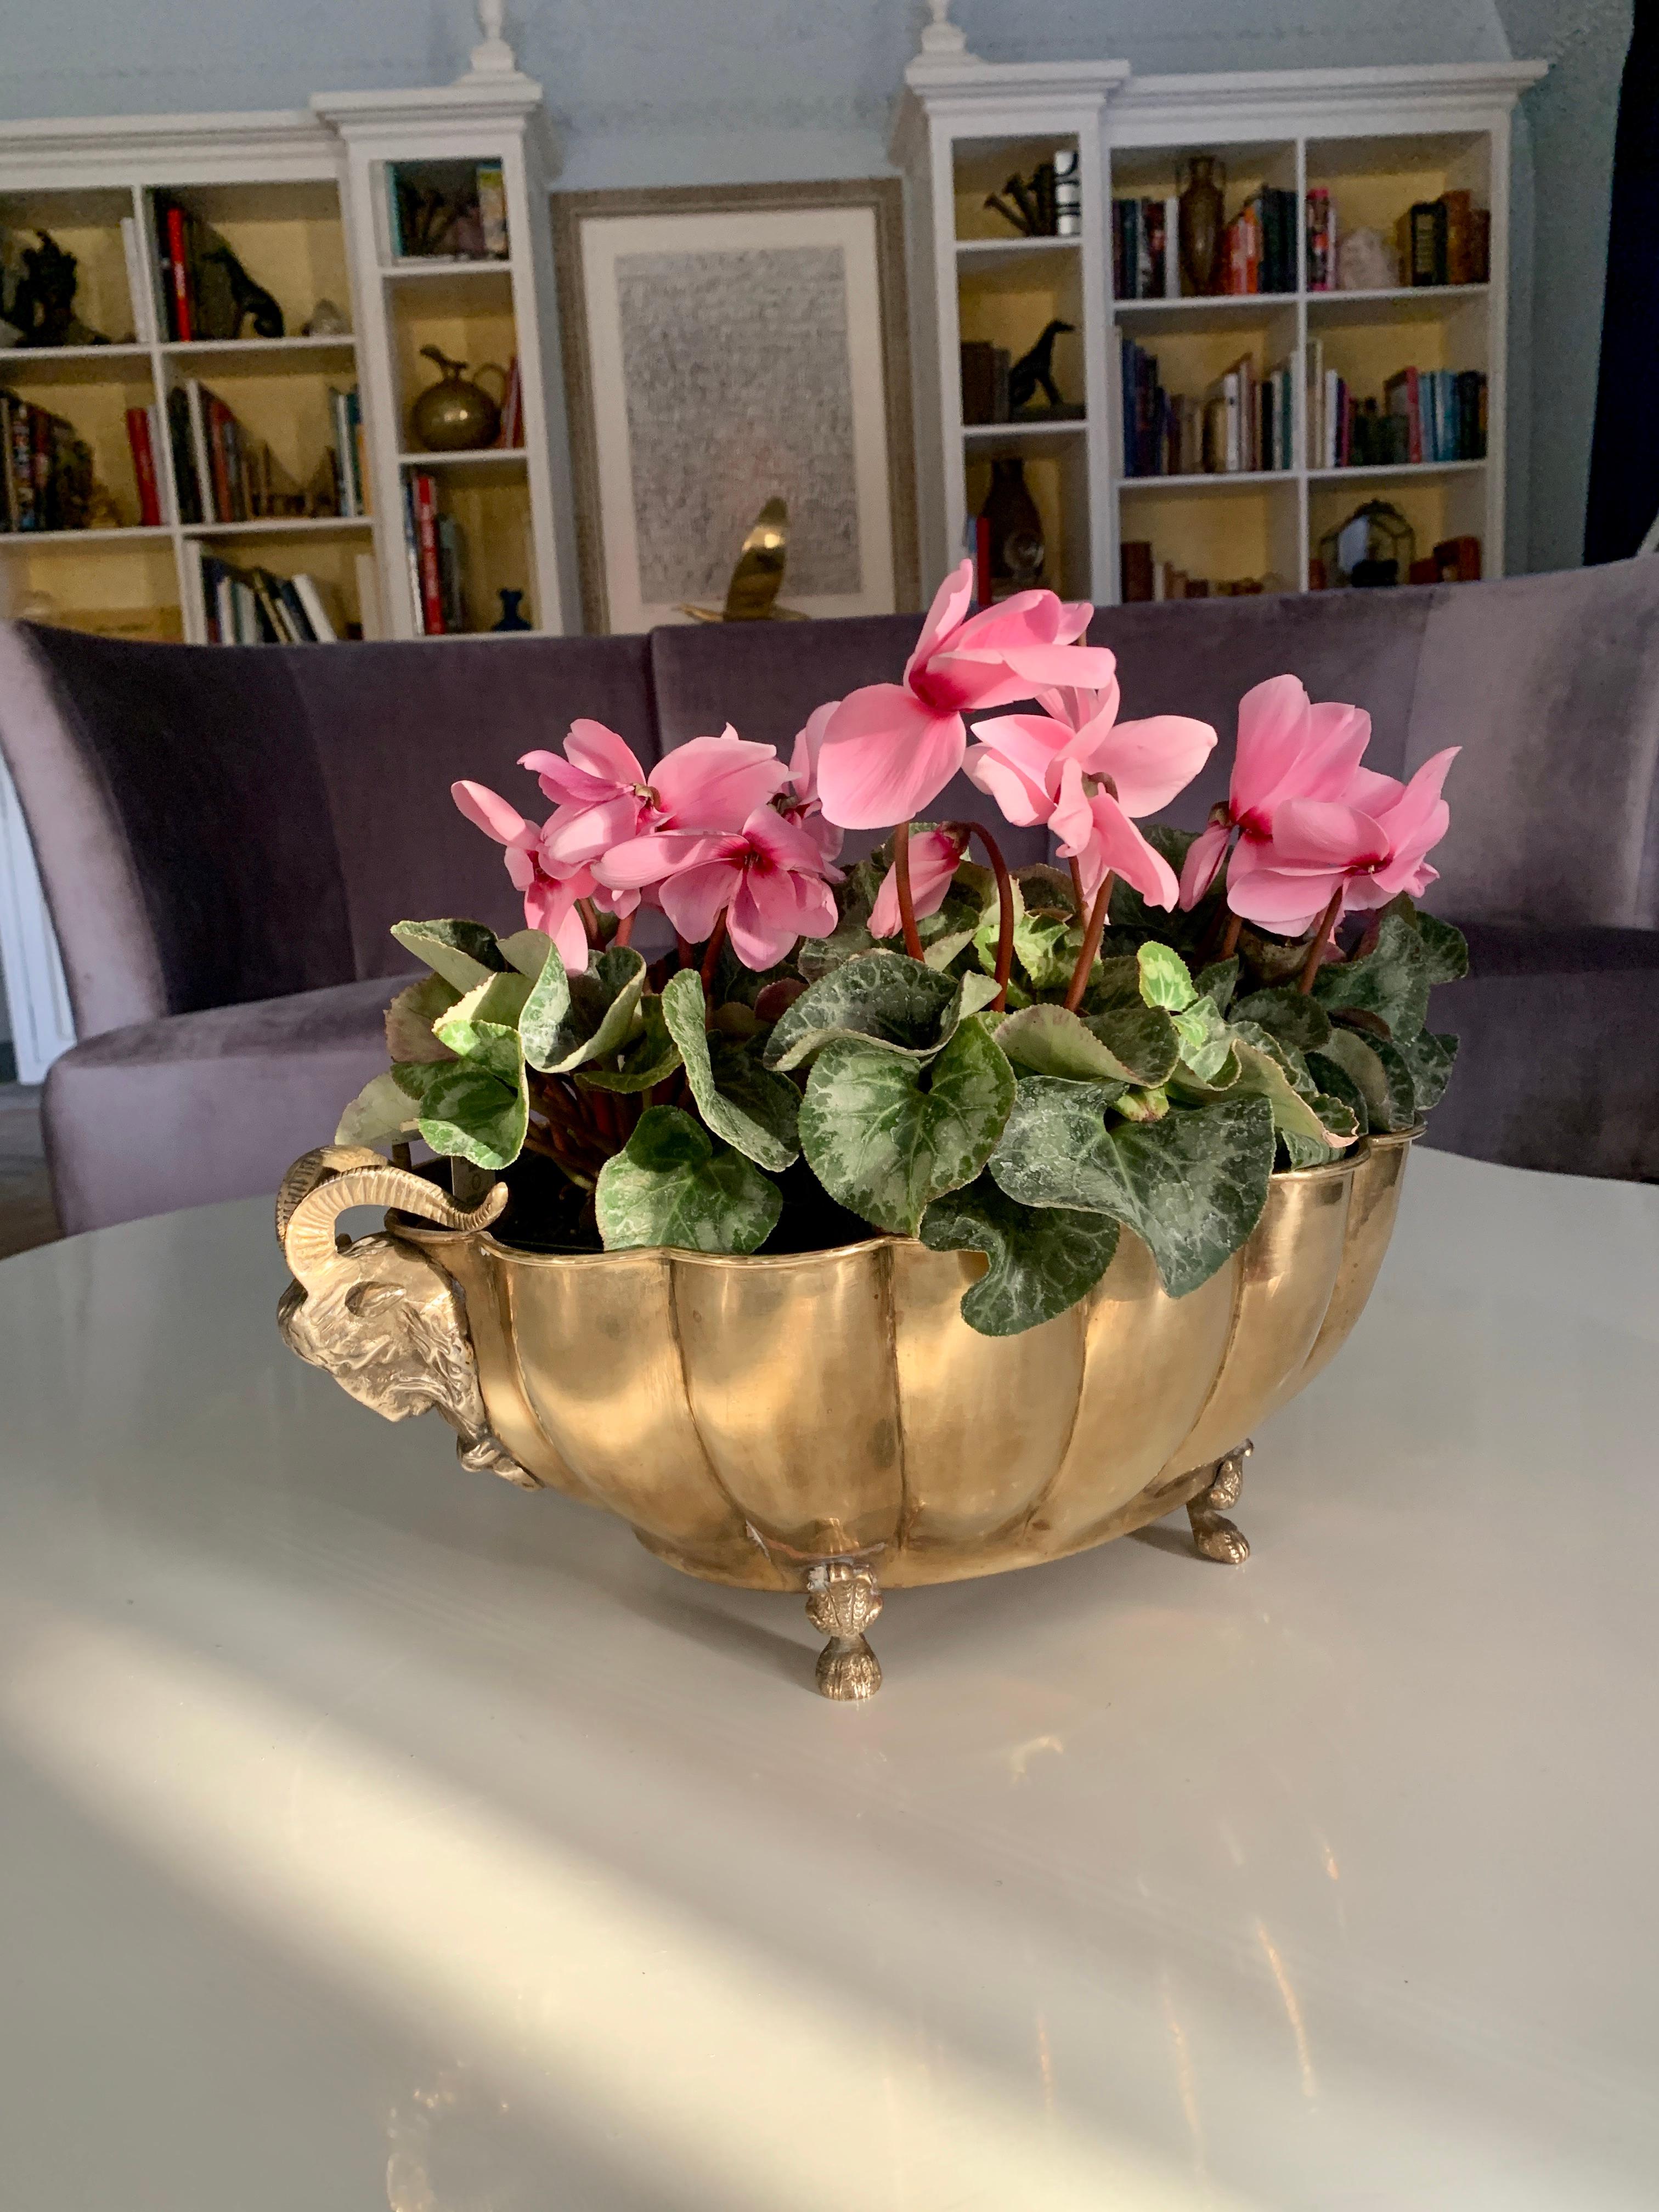 Brass jardinière with ram's head handles and paw feet, a large oval structure with bowed ribbing. A wonderful for fresh flowers, potted plants and a remarkable centerpiece.

Additionally it is a nice catch-all for everything from mail to love